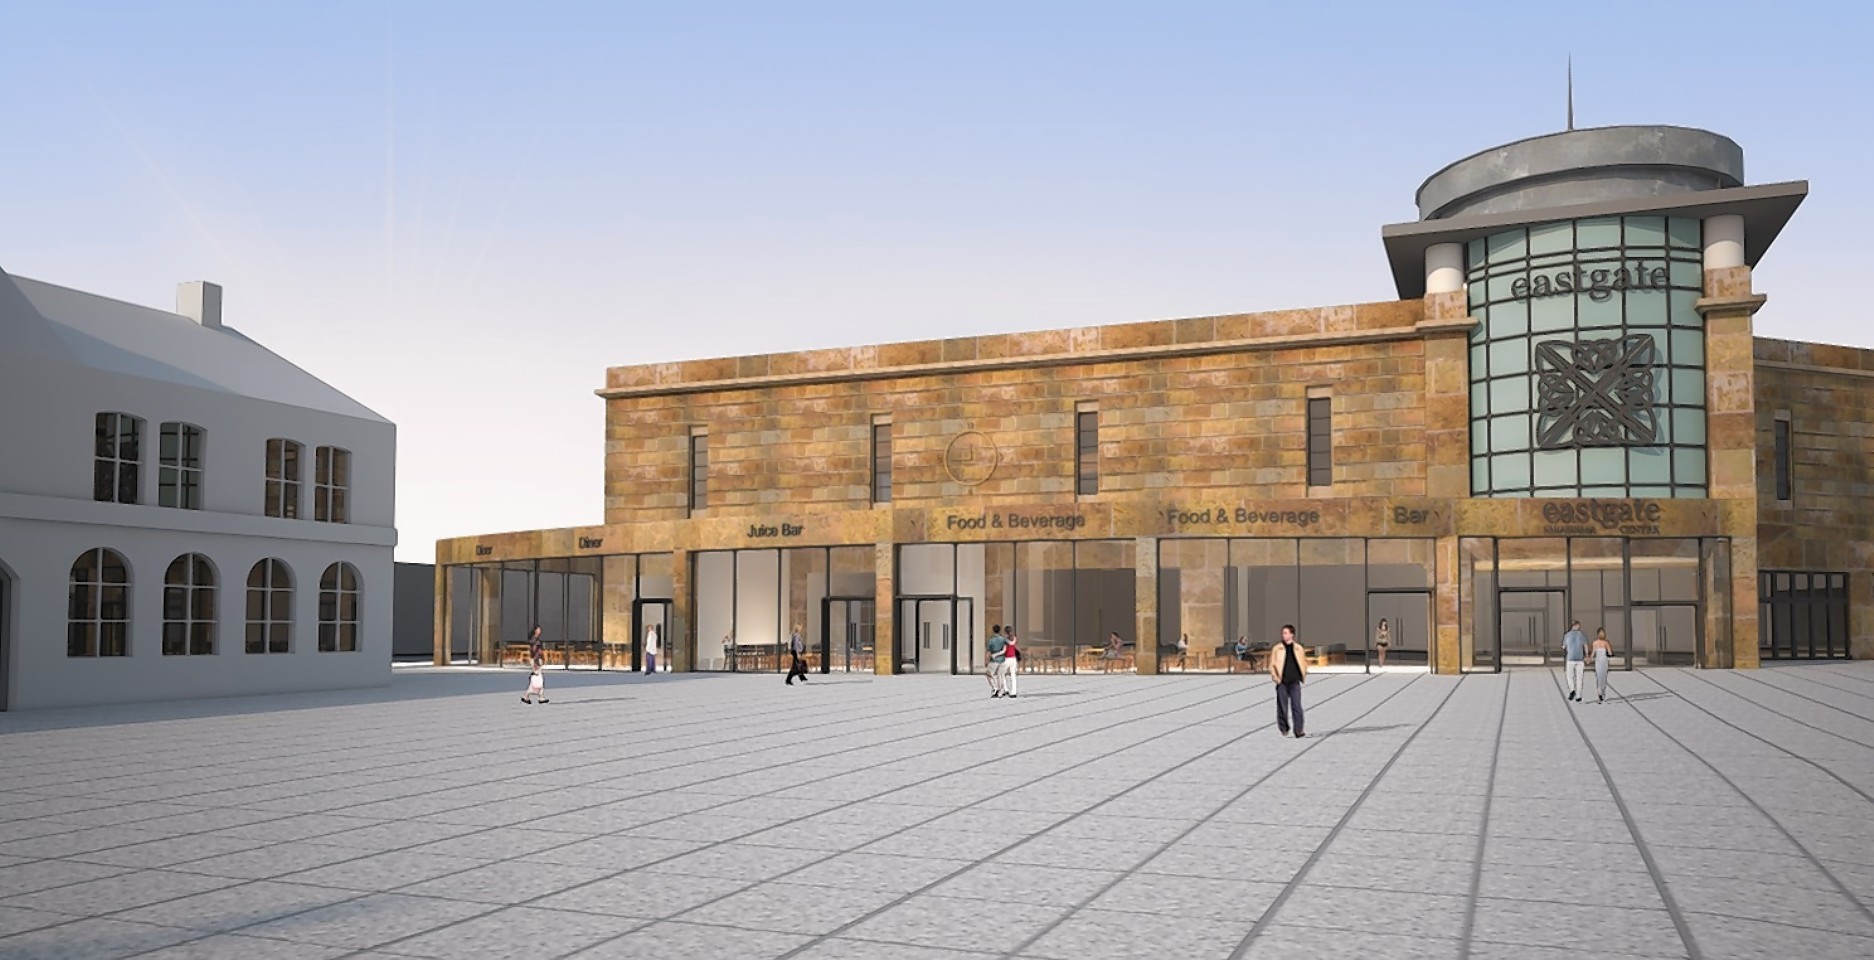 Artist impressions for the eastgate shopping centre in Inverness. Shows facade extension